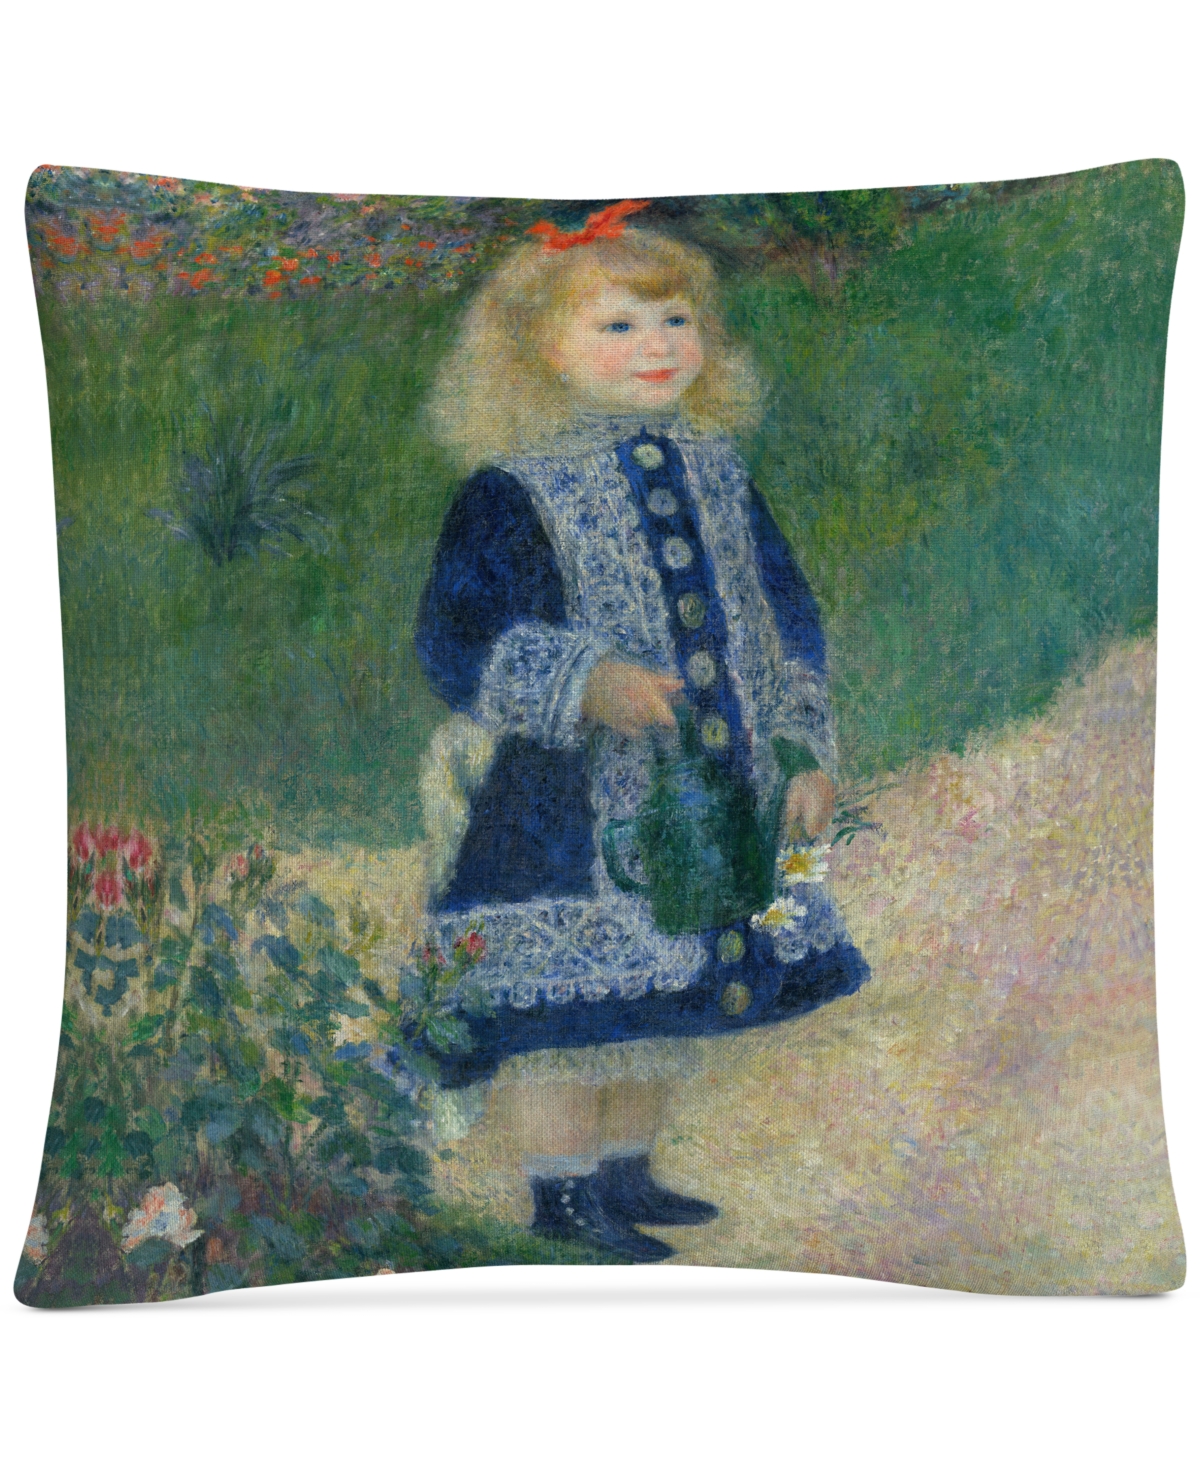 Pierre Renoir A Girl With a Watering Can Decorative Pillow, 16 x 16